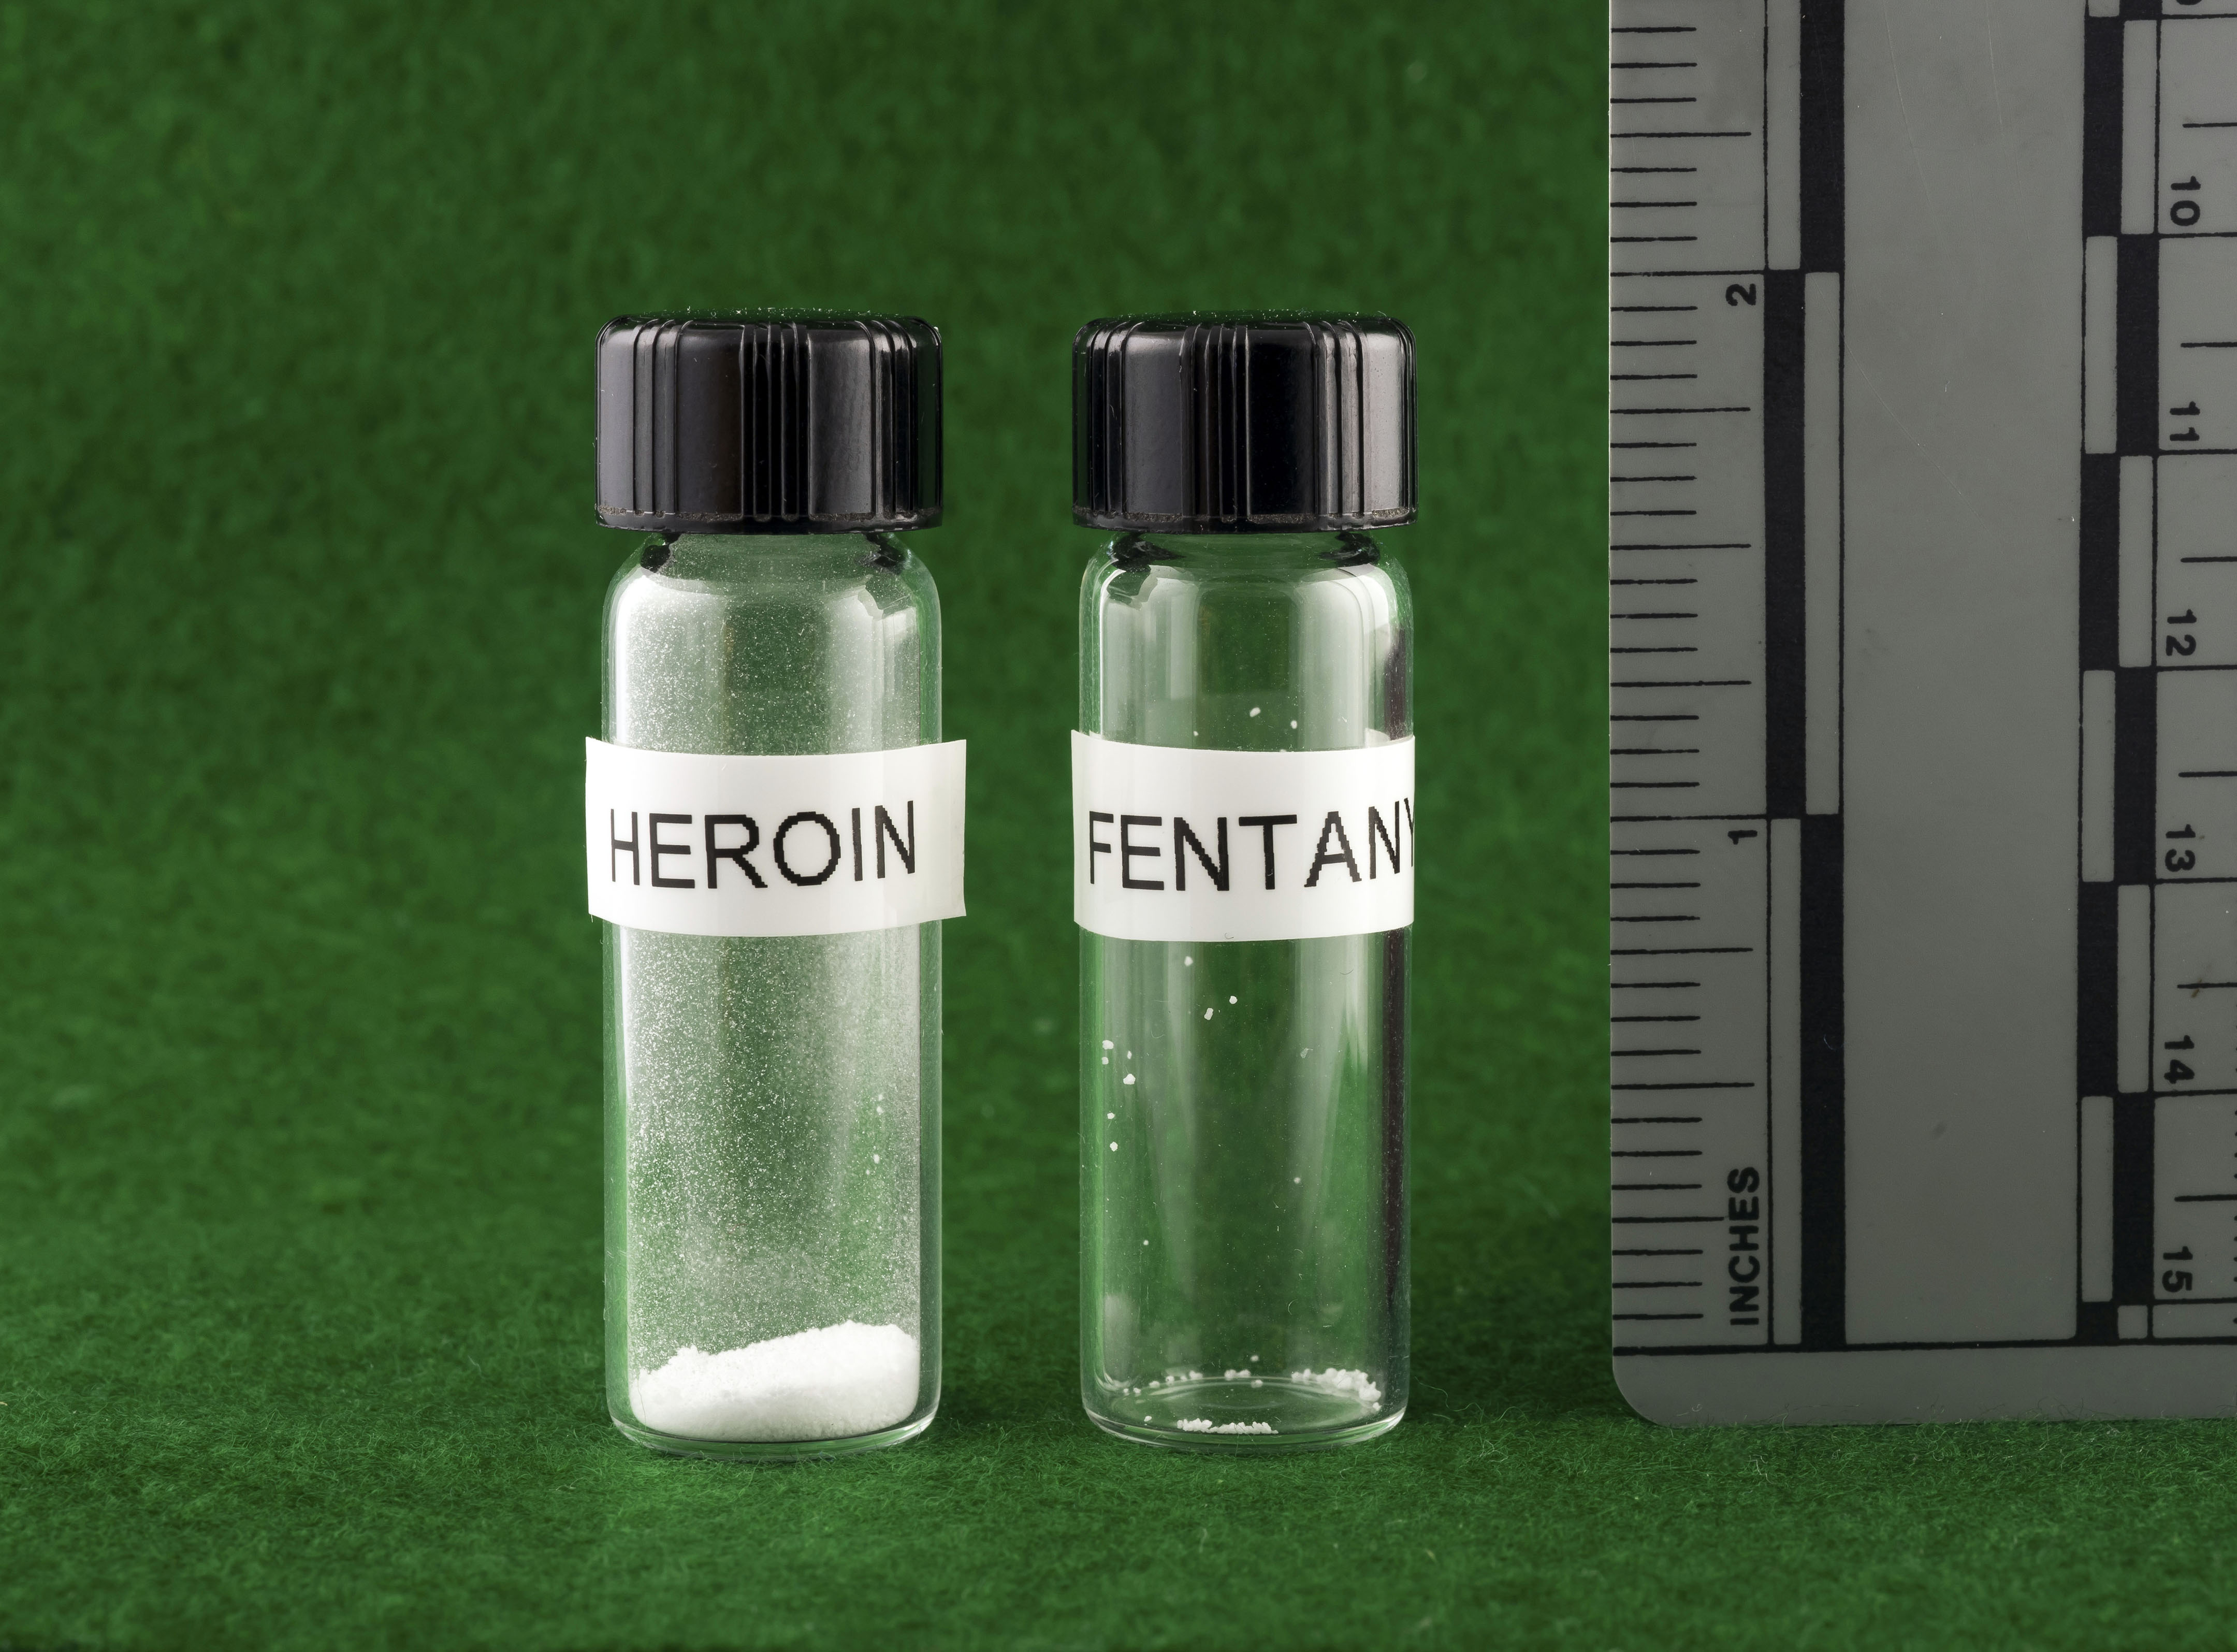 Fentanyl Can Sicken First Responders. Here's a Possible Solution.